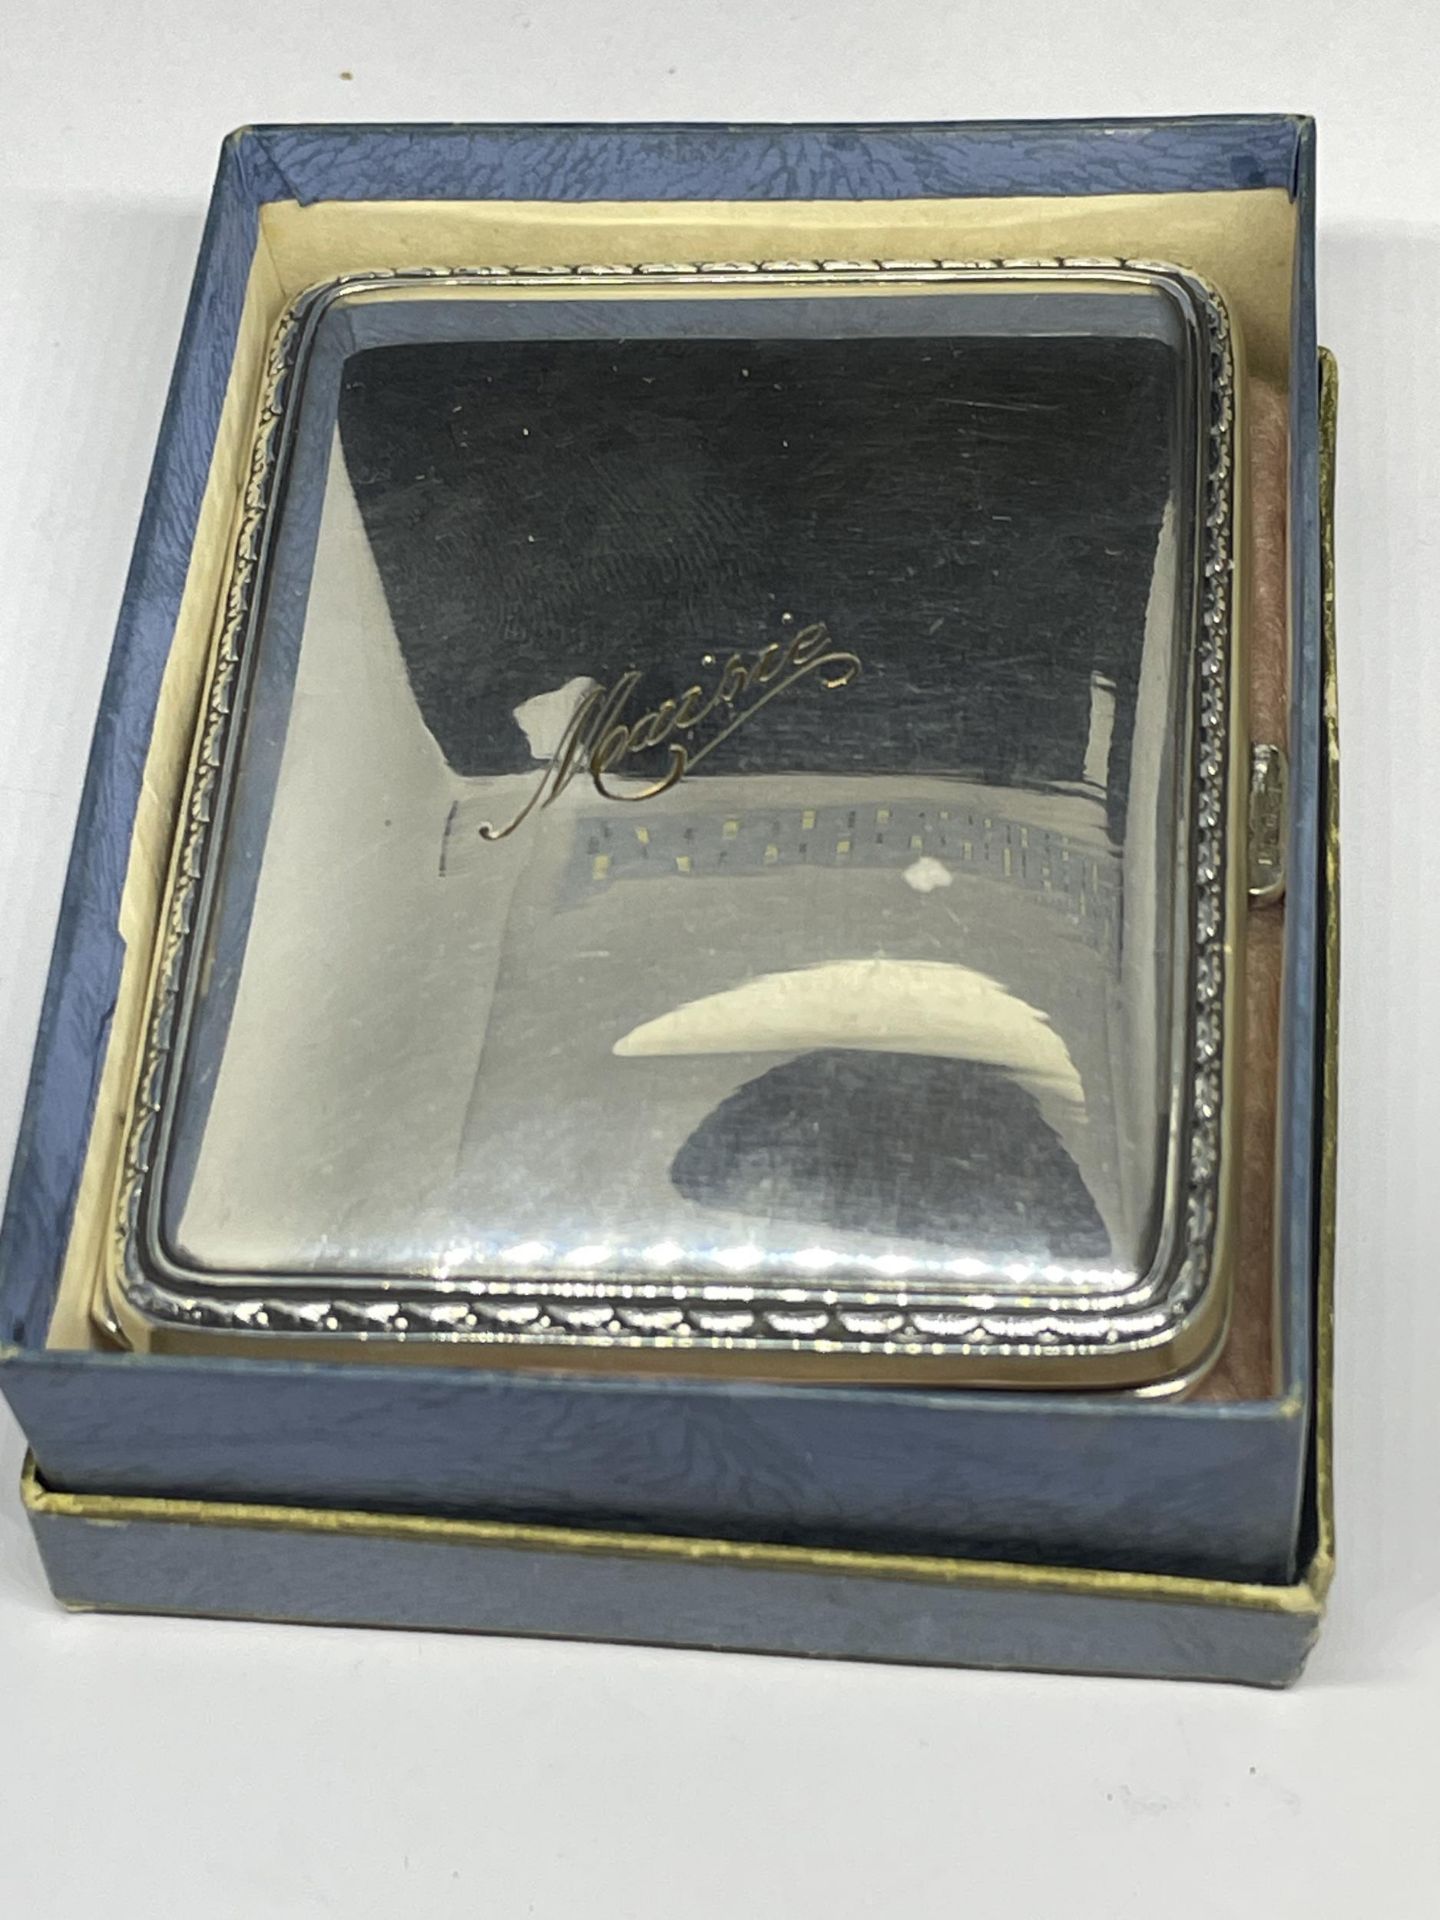 A GERMAN CIGARETTE CASE ENGRAVED MAISIE TO THE FRONT AND FROM HANS 24.12.1951